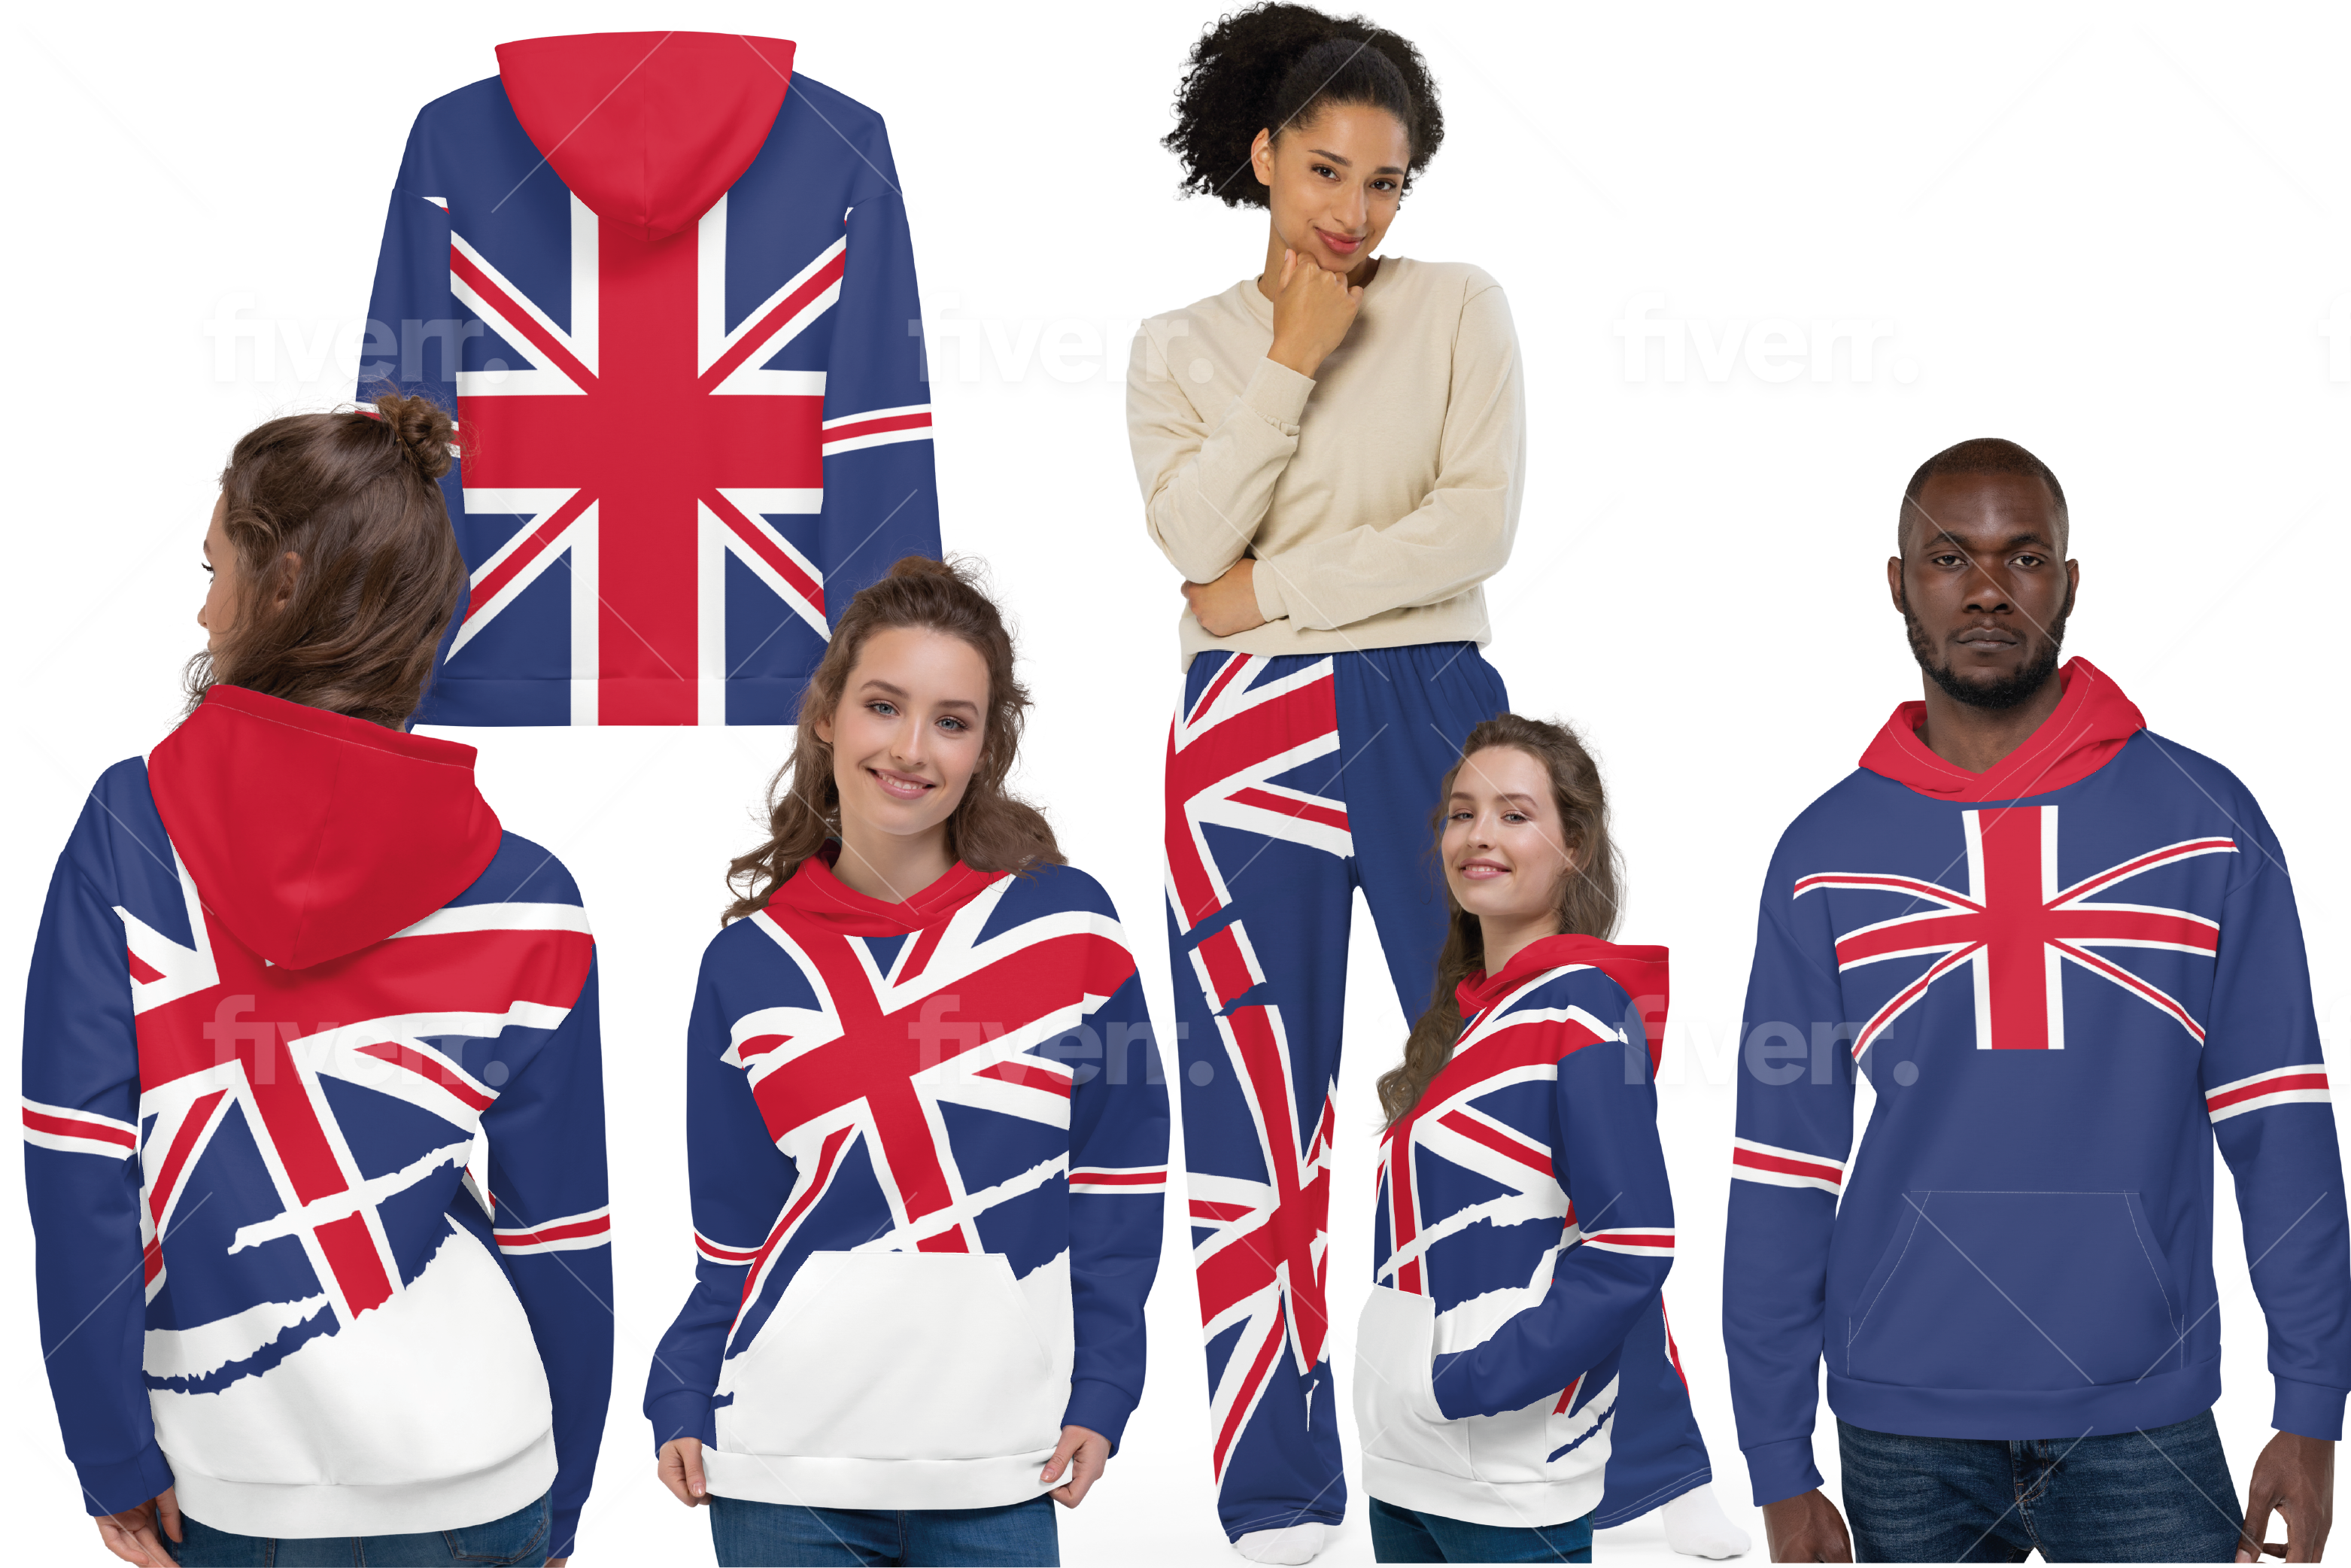 New 2023 arrivals! My colorful England flag inspired unisex oversized volleyball team hoodies by Volleybragswag are now sold on ETSY!